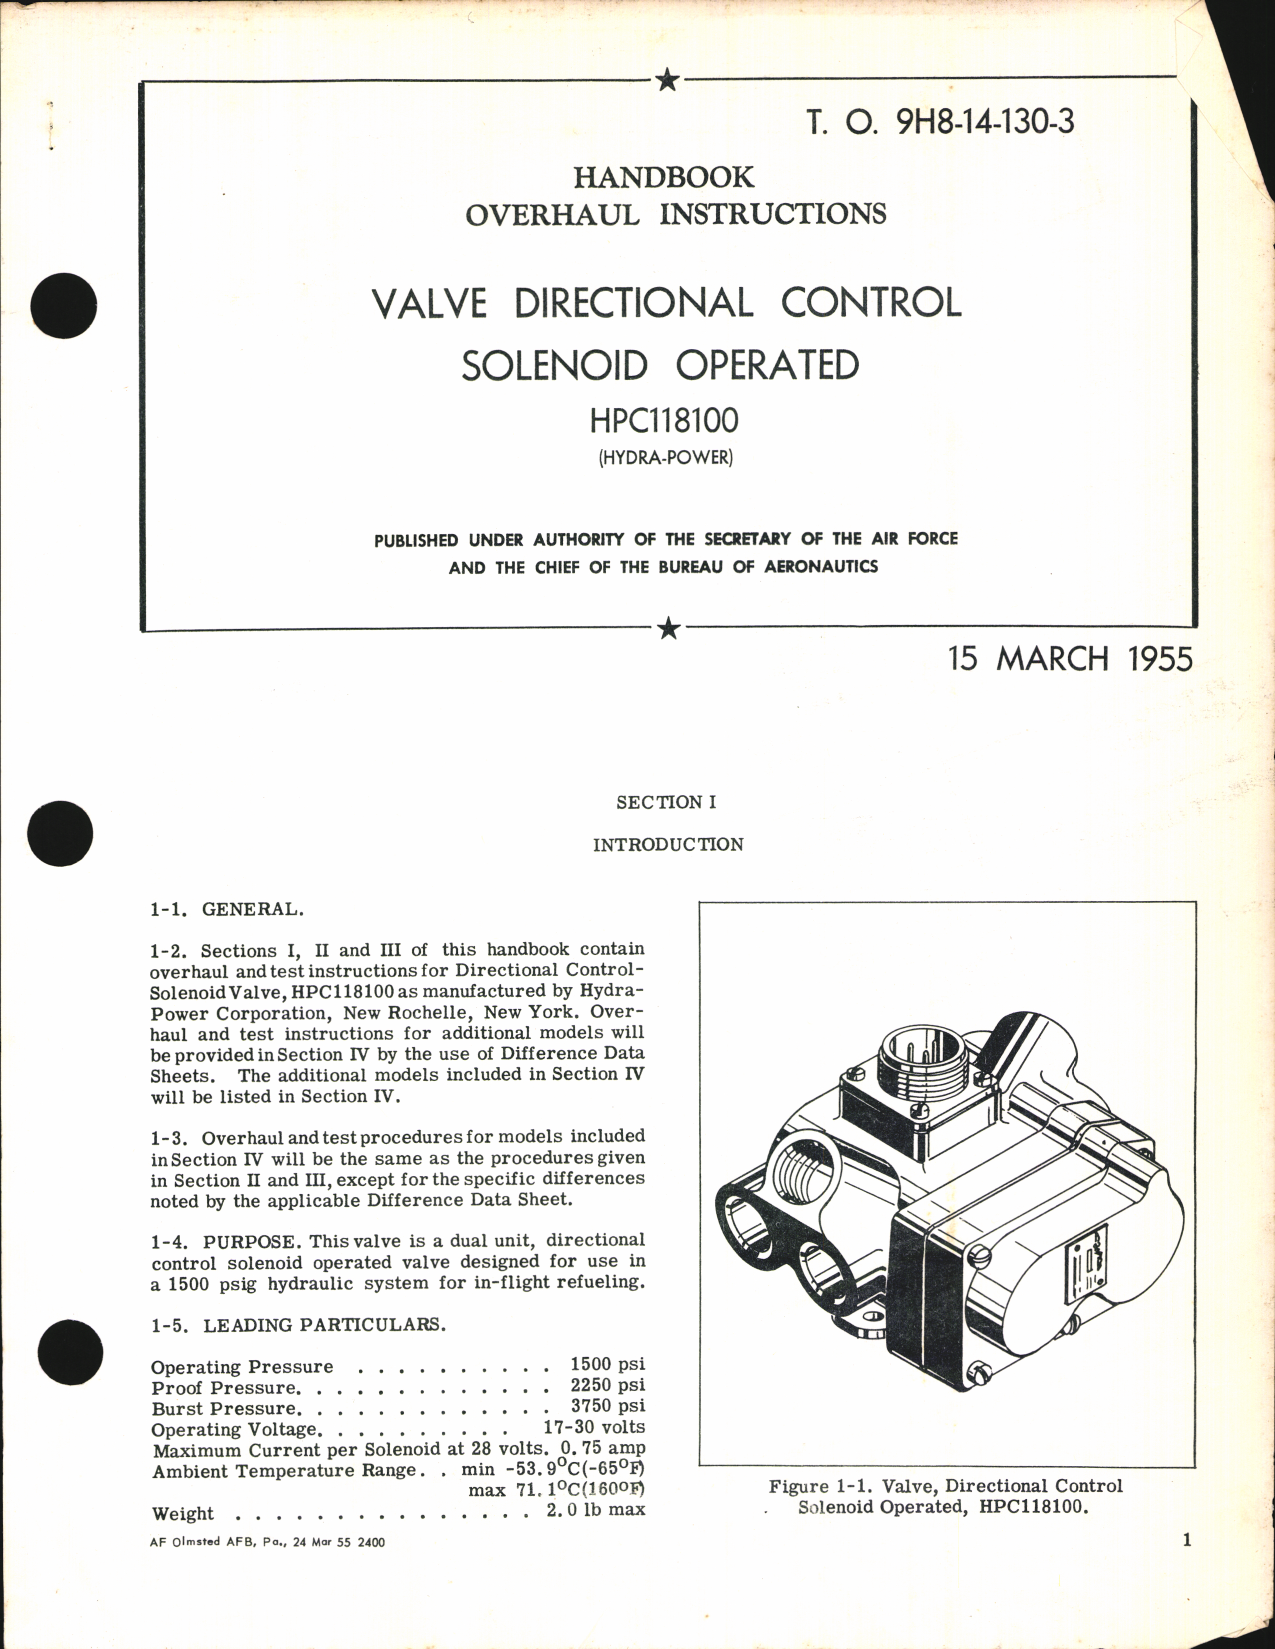 Sample page 1 from AirCorps Library document: Handbook of Instructions for Valve Directional Control Solenoid Operated HPC118100